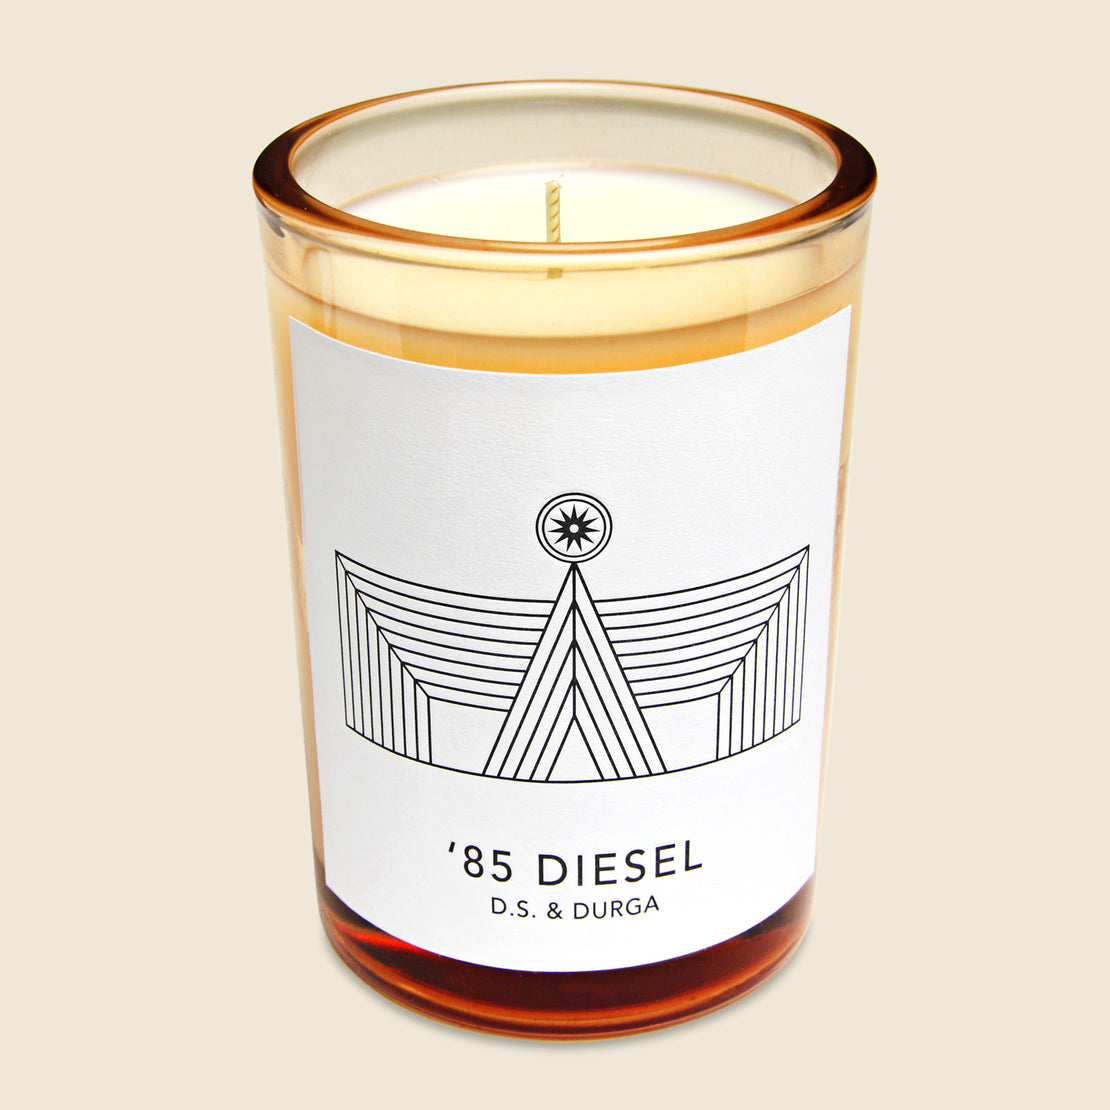 85 Diesel Candle - D.S. & Durga - STAG Provisions - Home - Fragrance - Candle